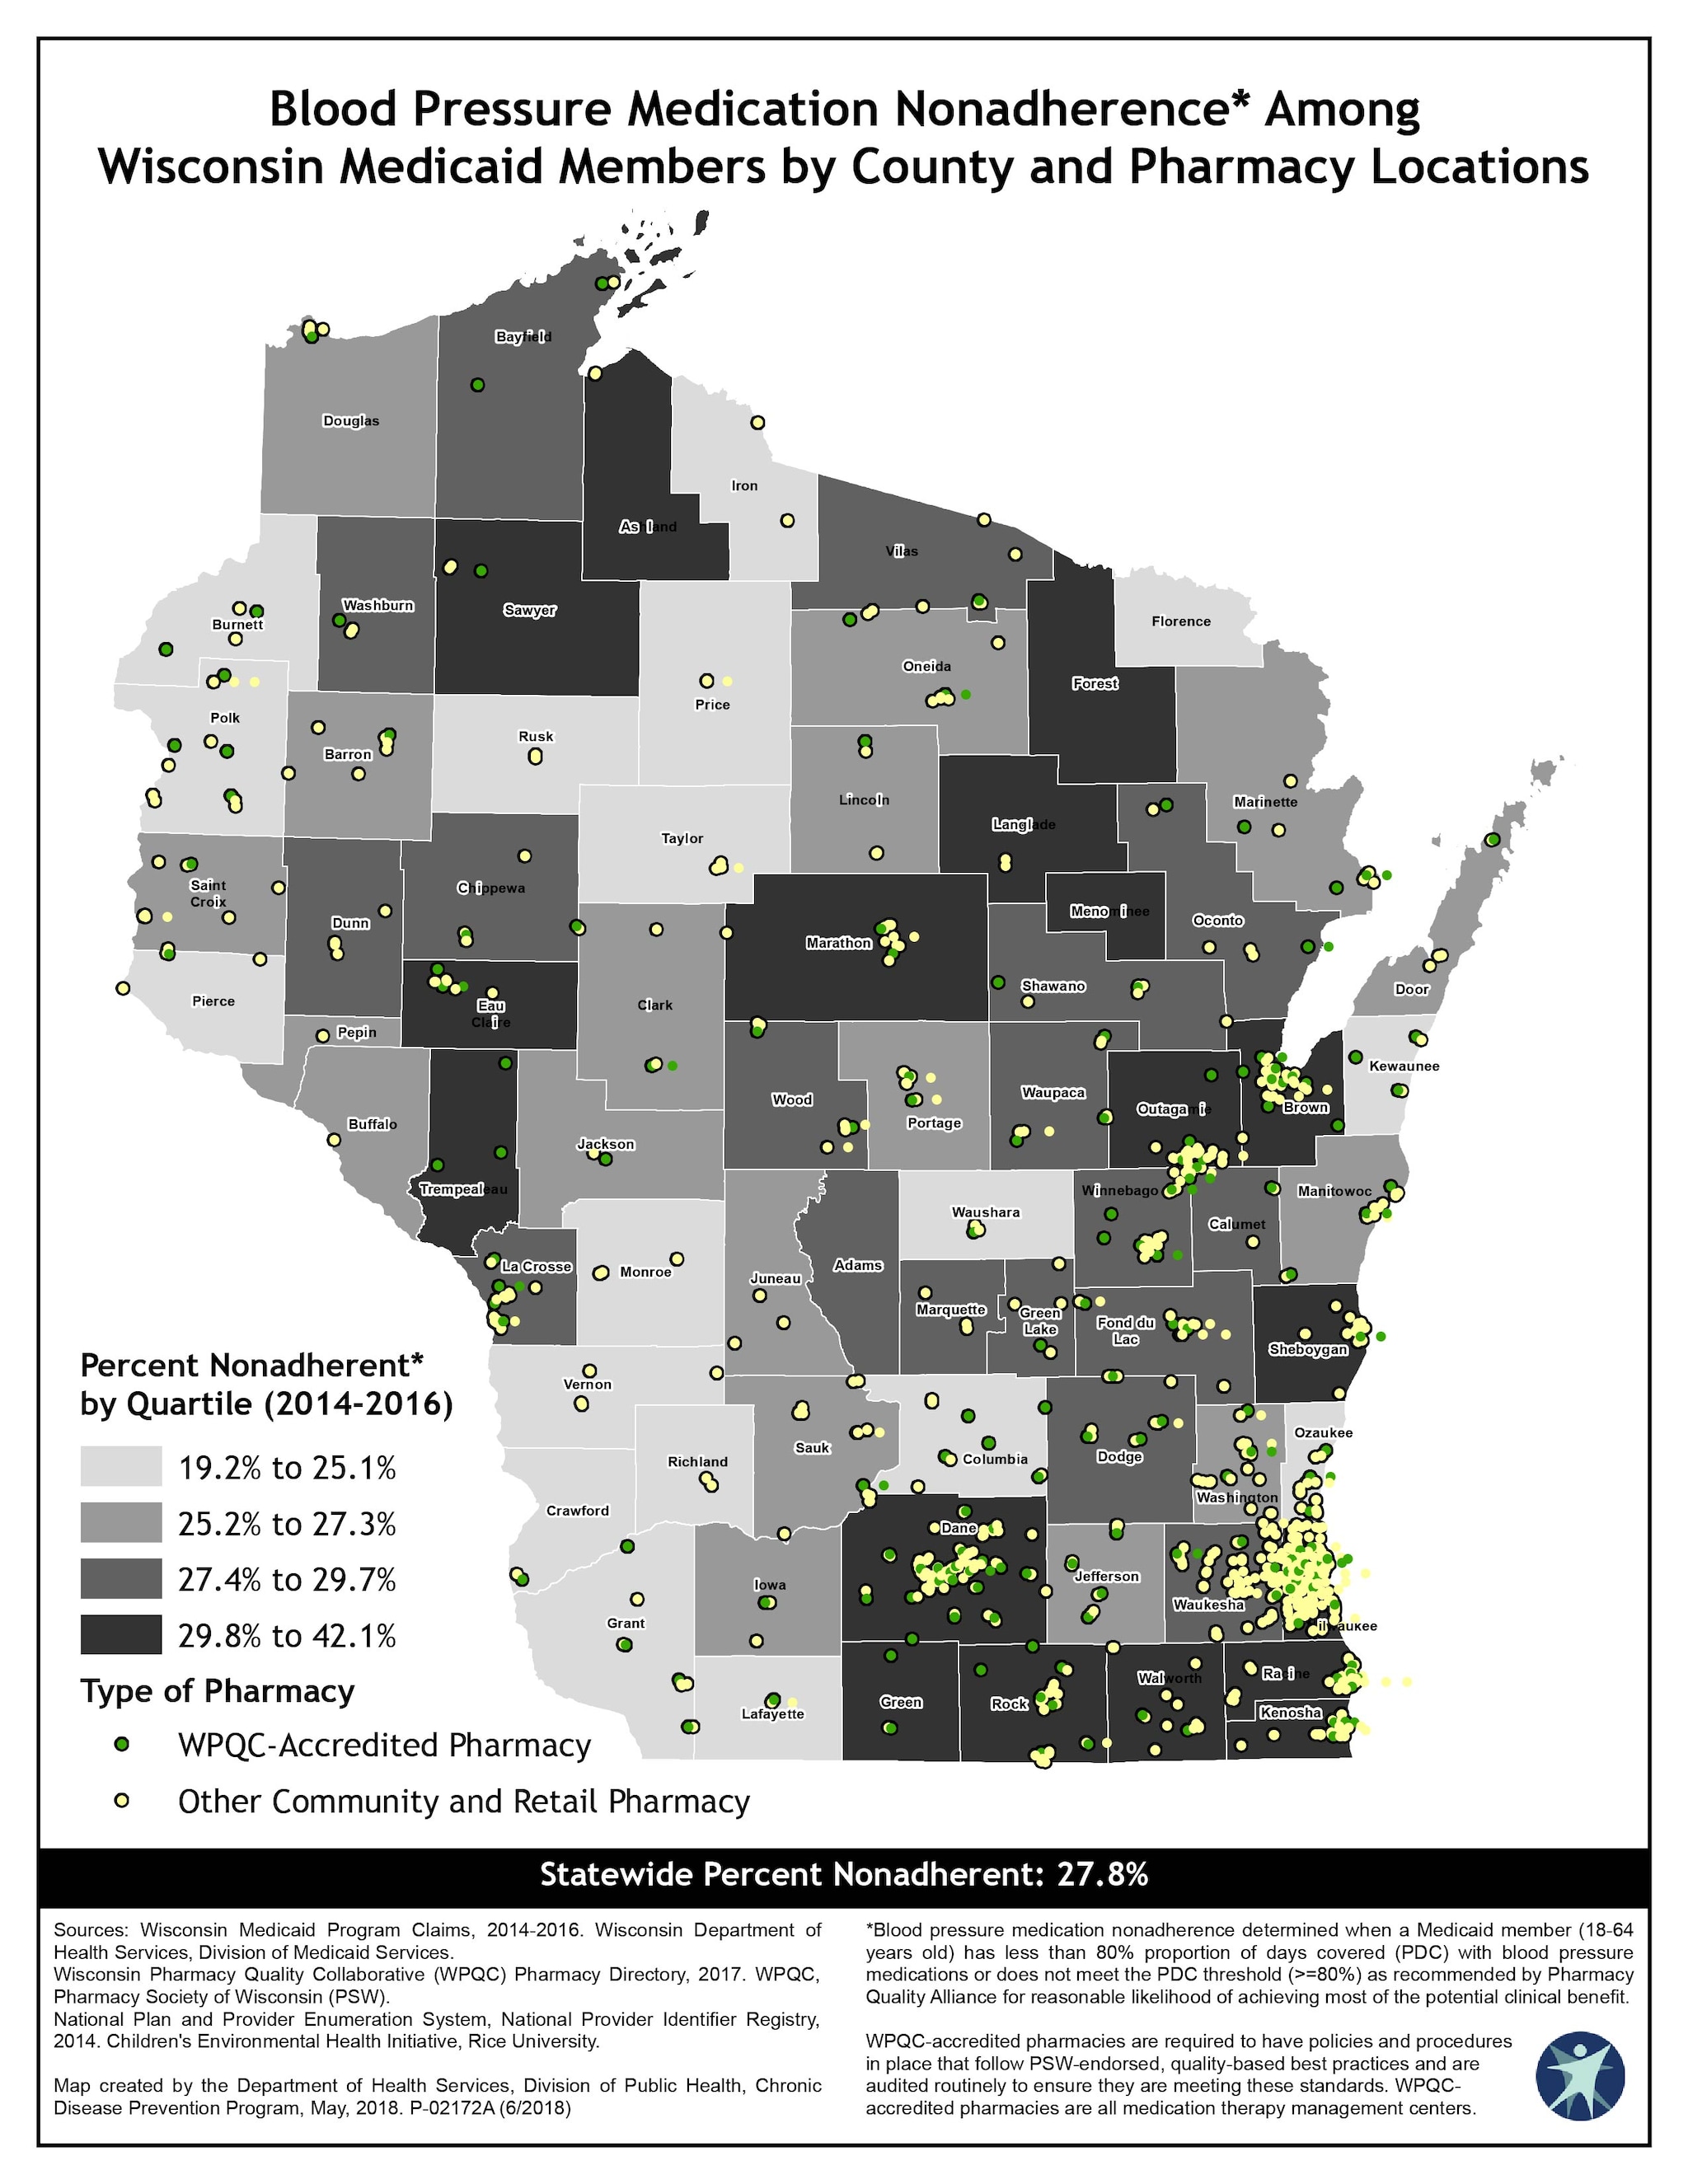 Blood Pressure Medication Nonadherence Among Wisconsin Medicaid Members by County, 2014-2016